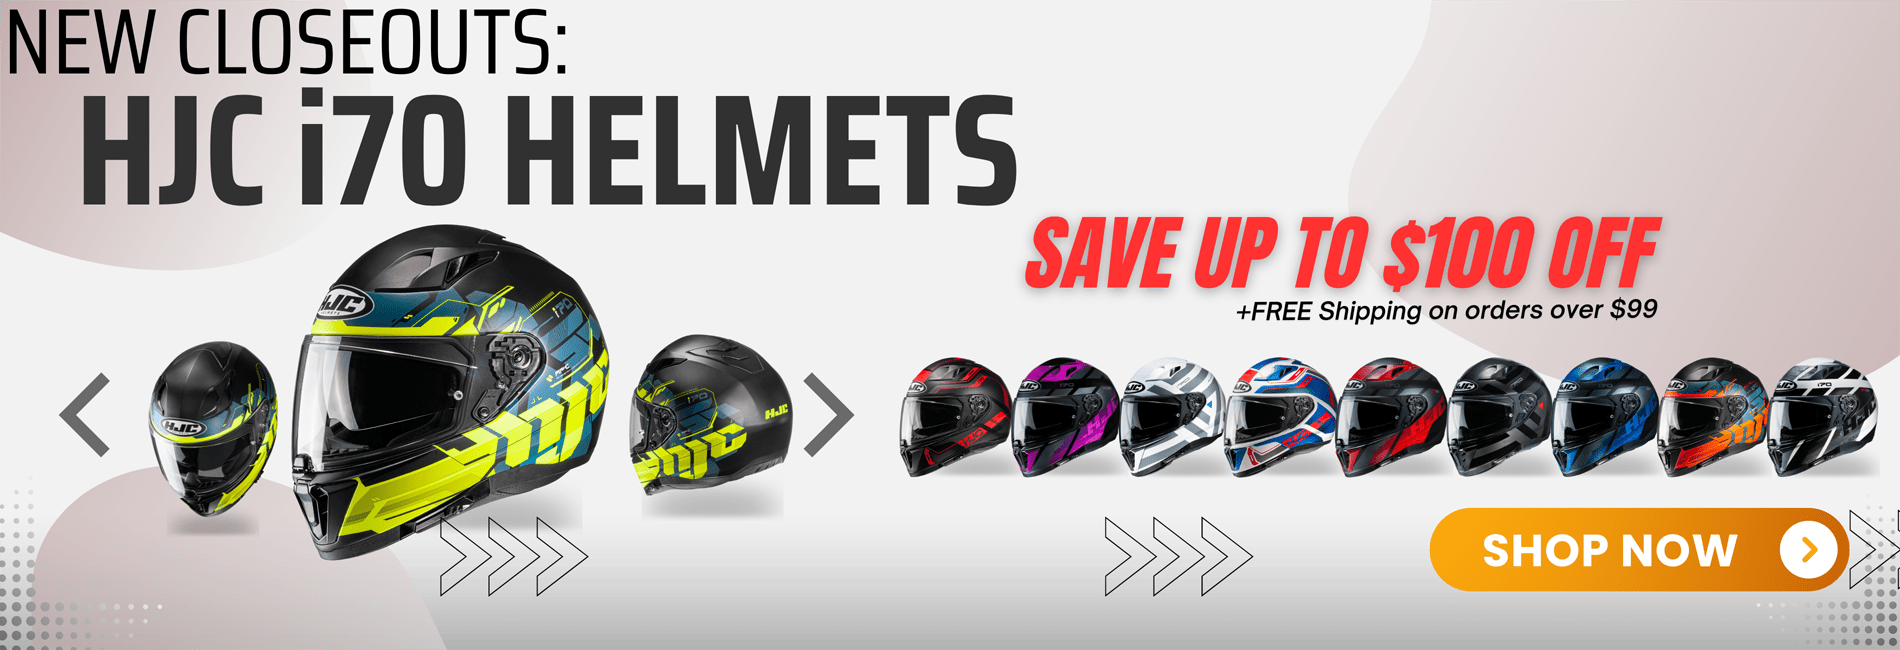 HJC i70 Closeout helmets up to 100 off